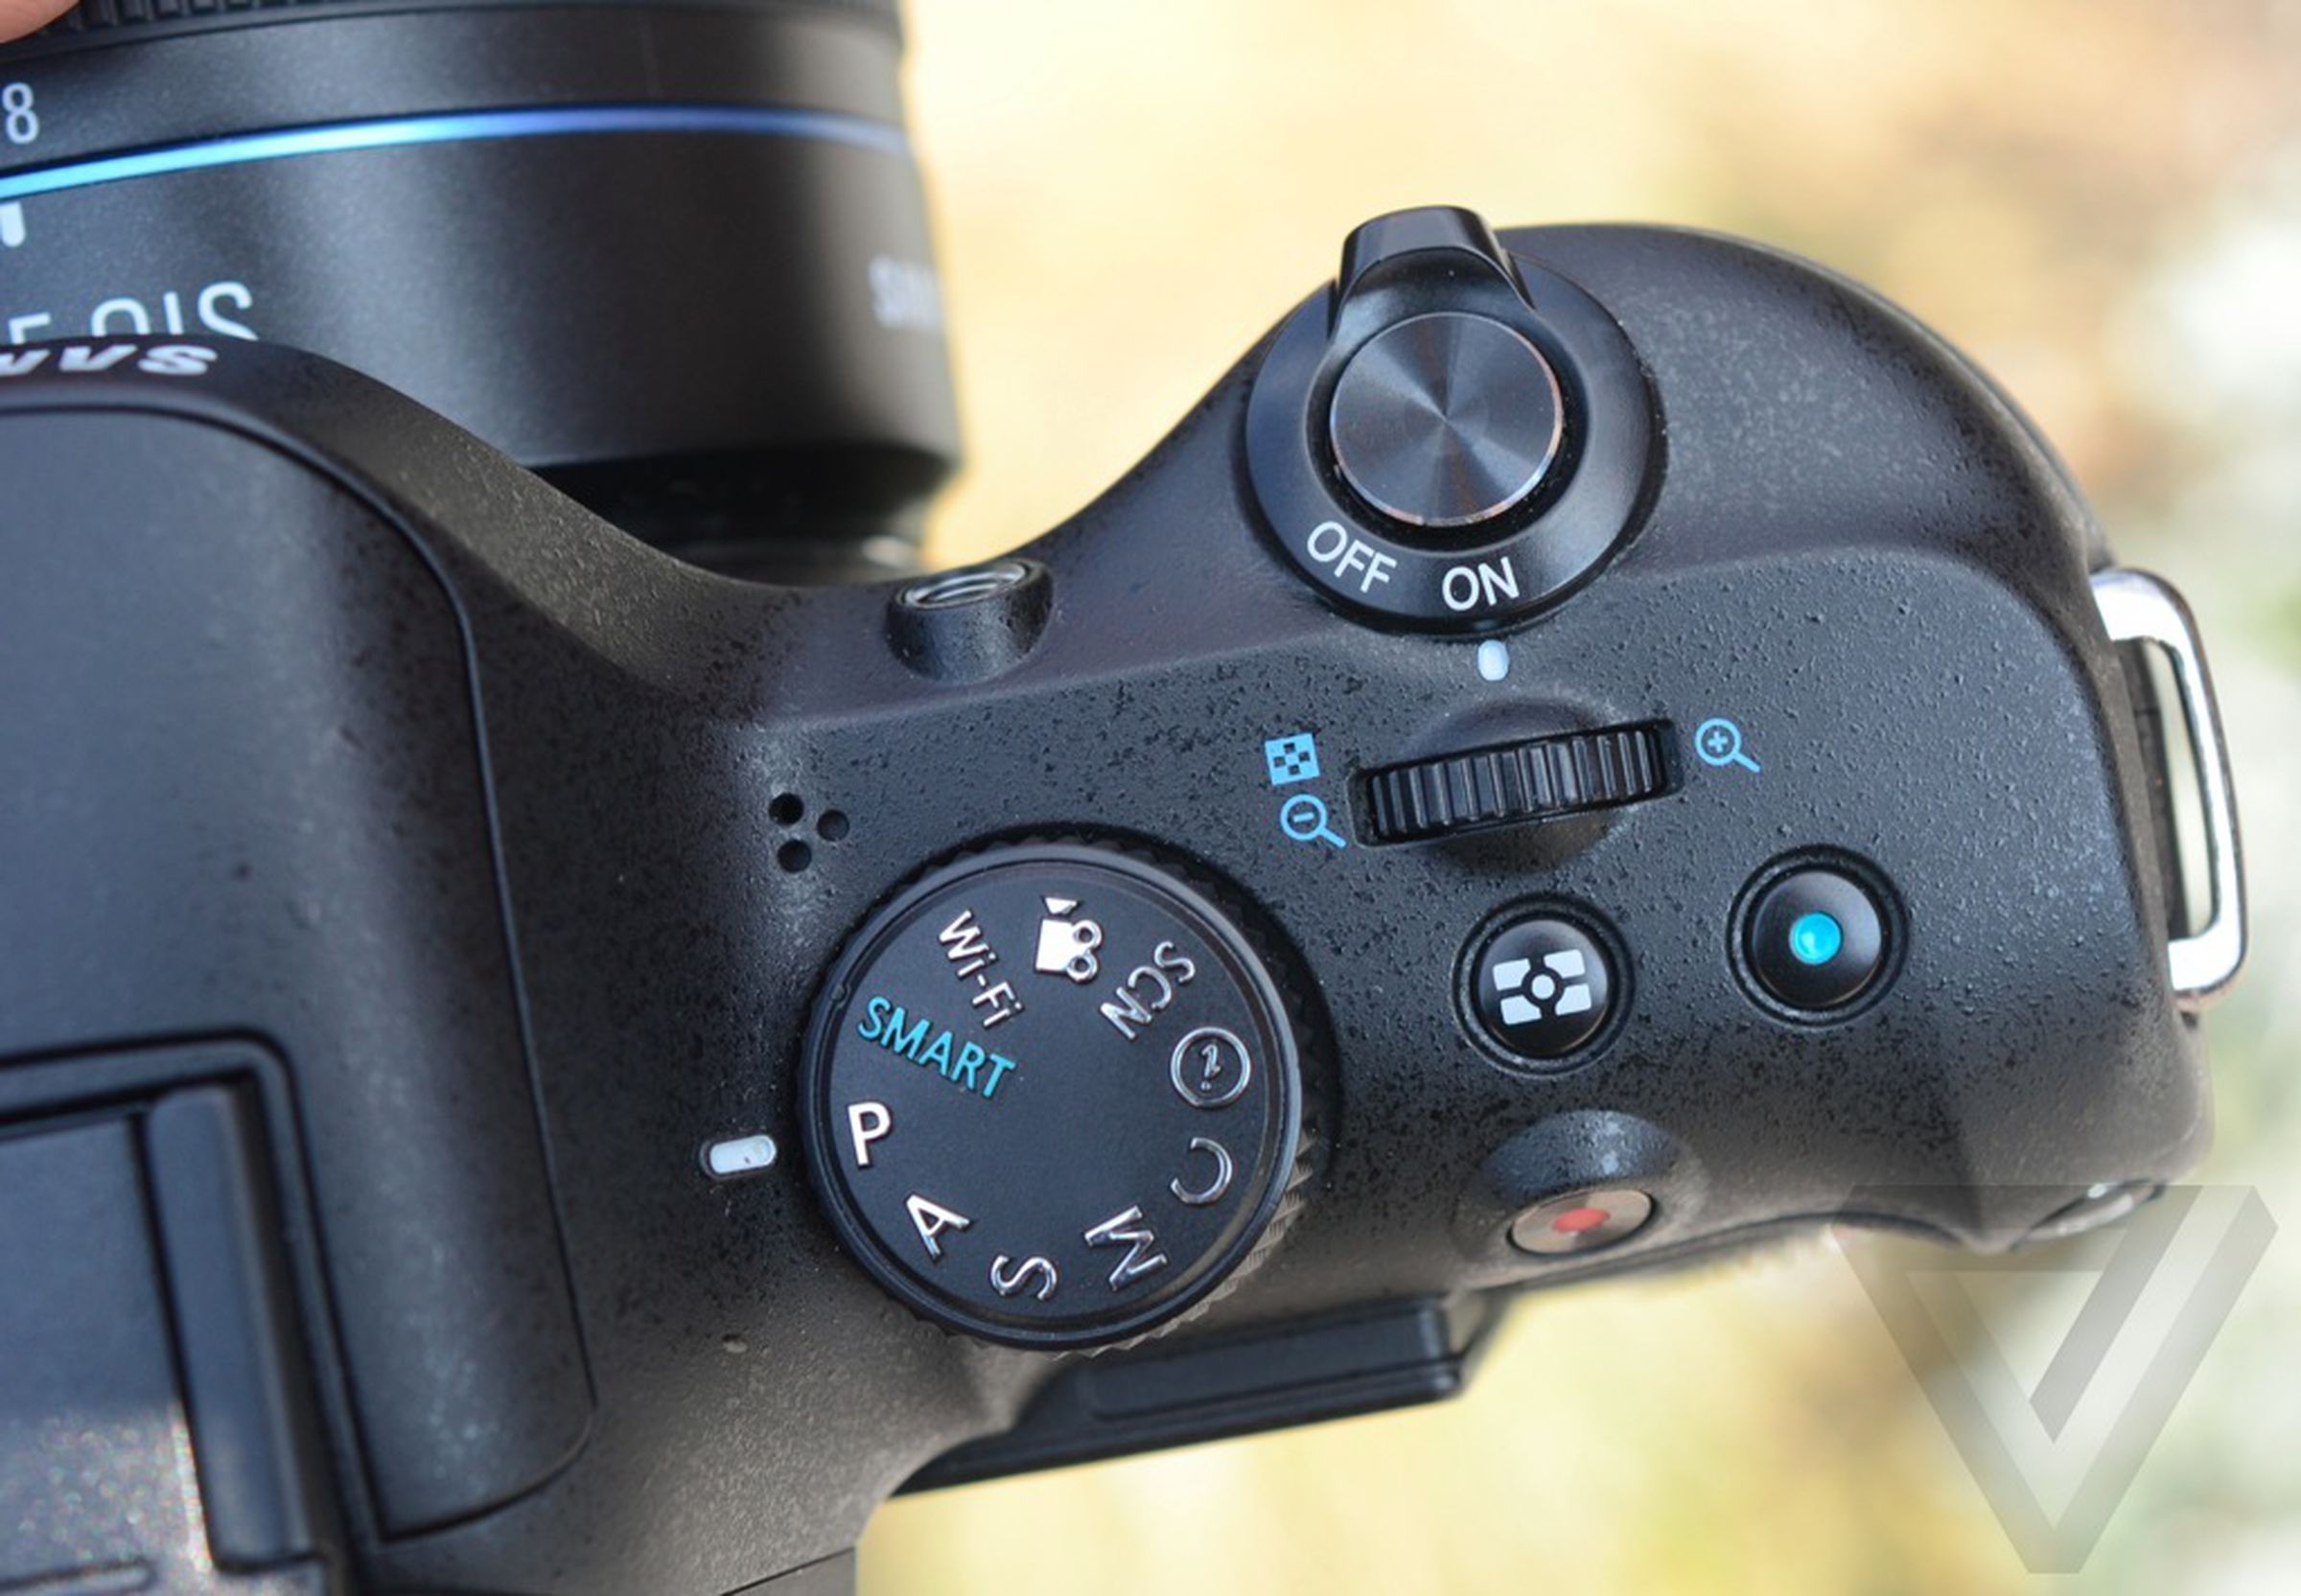 Samsung NX20 review pictures